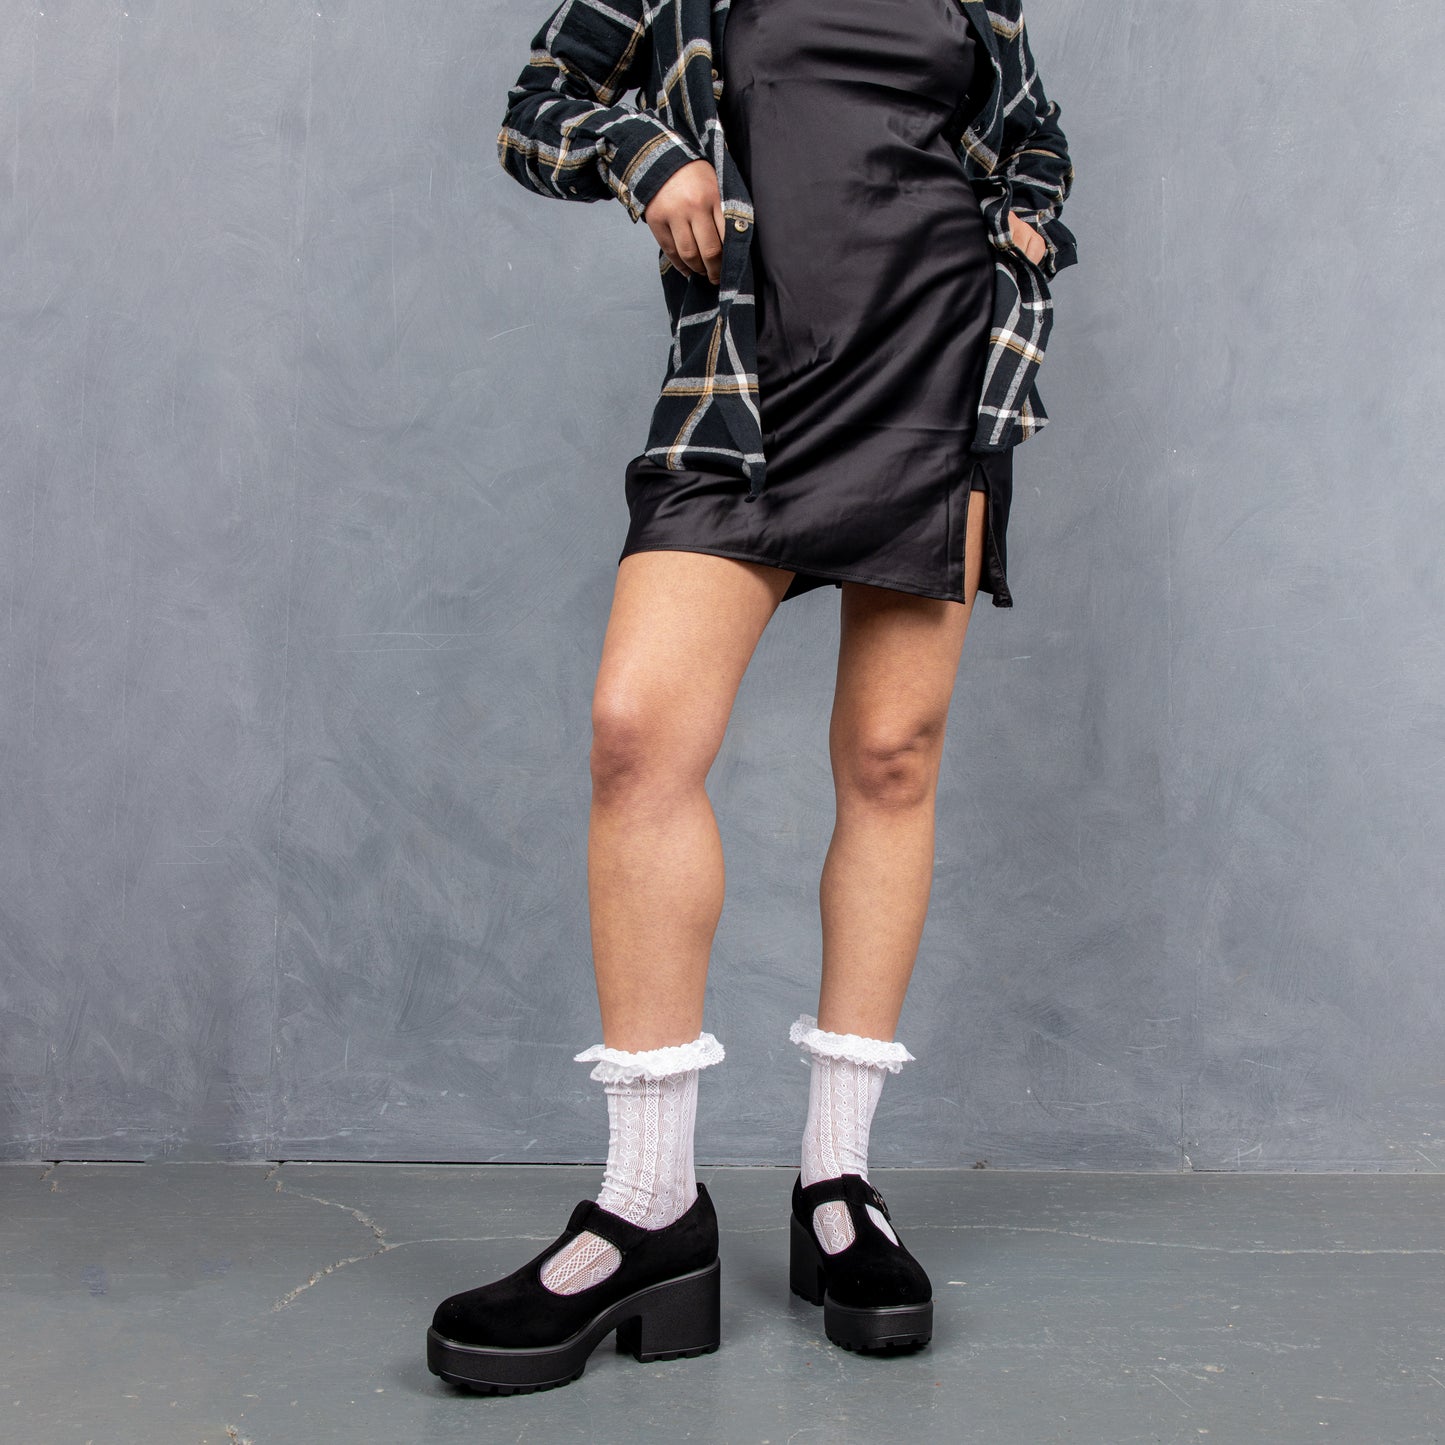 Sai Black Mary Jane Shoes 'Suede Edition' - Mary Janes - KOI Footwear - Black - Full Model View